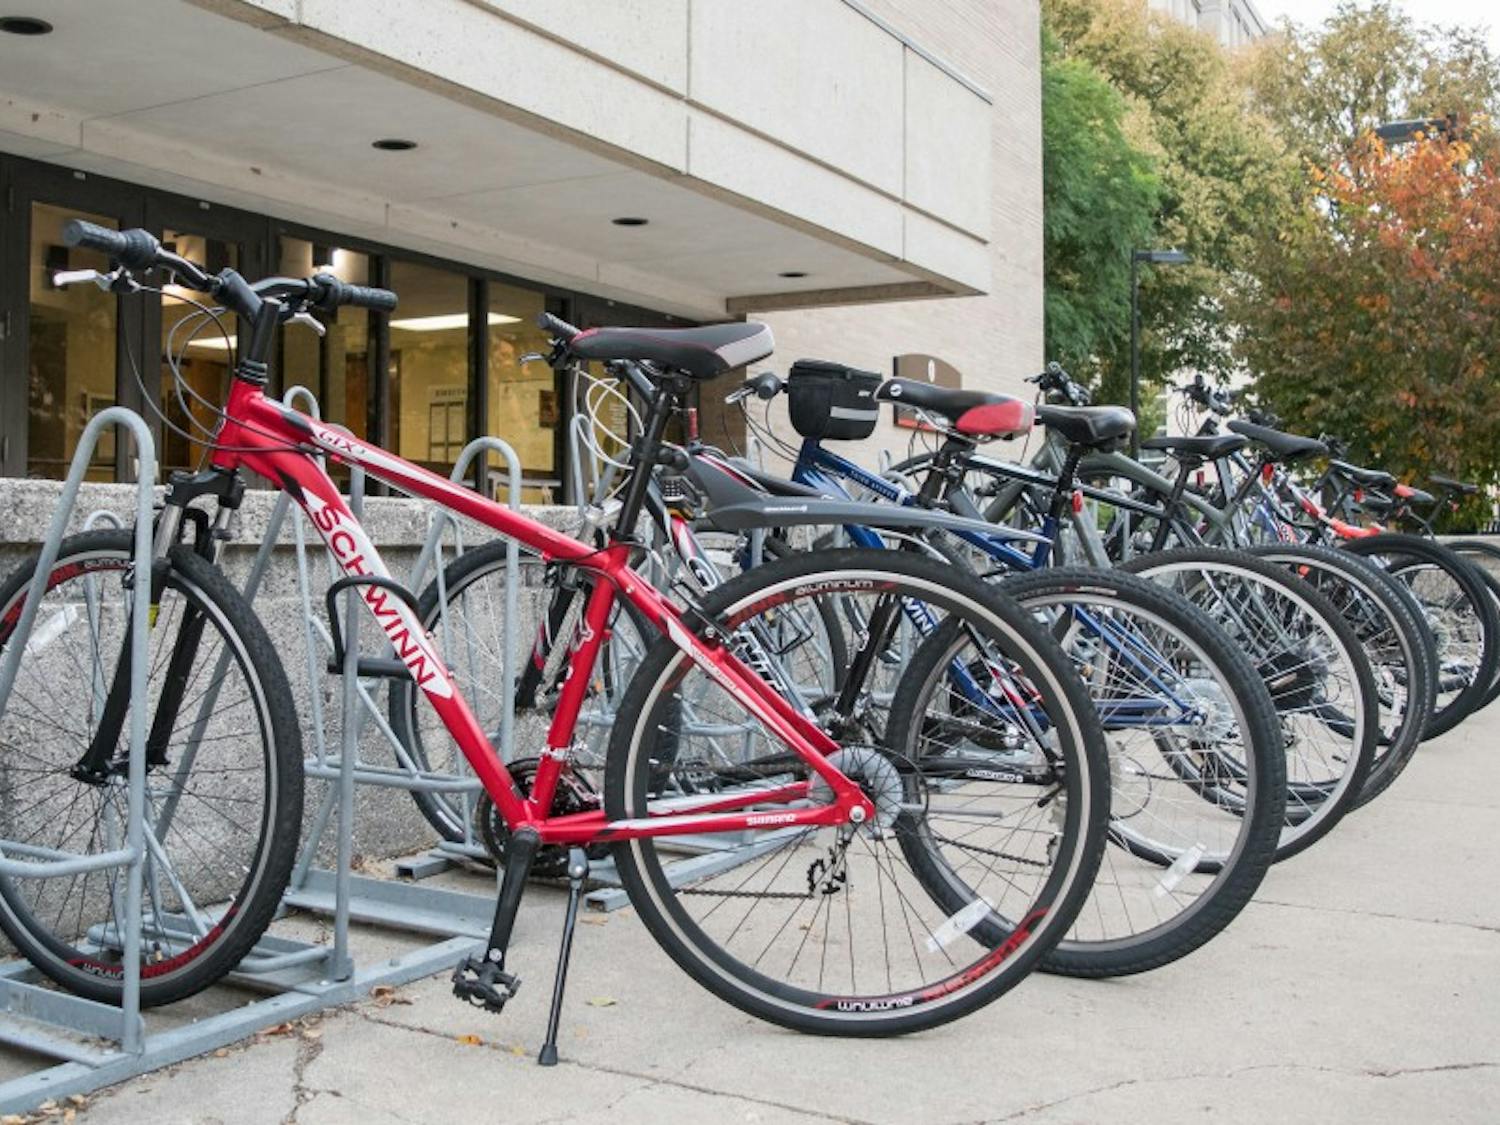 The state Assembly passed a bill in early September with a controversial provision that could affect how cyclist and pedestrian amenities in Madison are built.